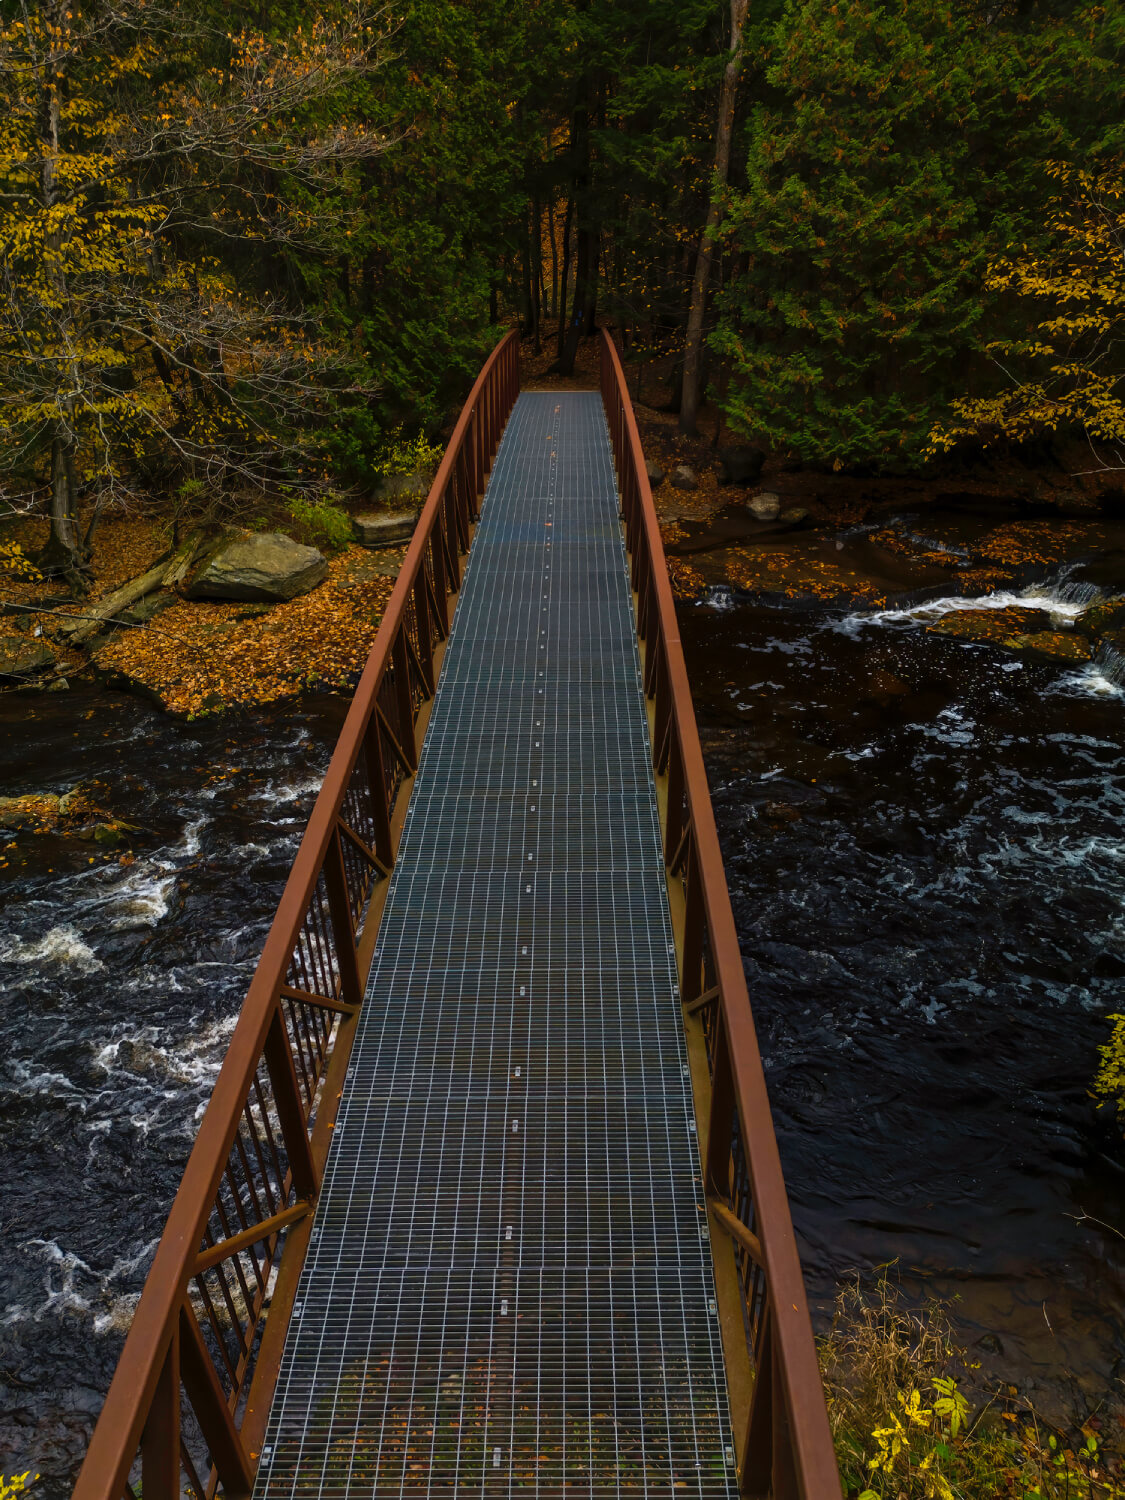 steel bridge above the Sydenham River in the forests of the Inglis Falls Conservation Area